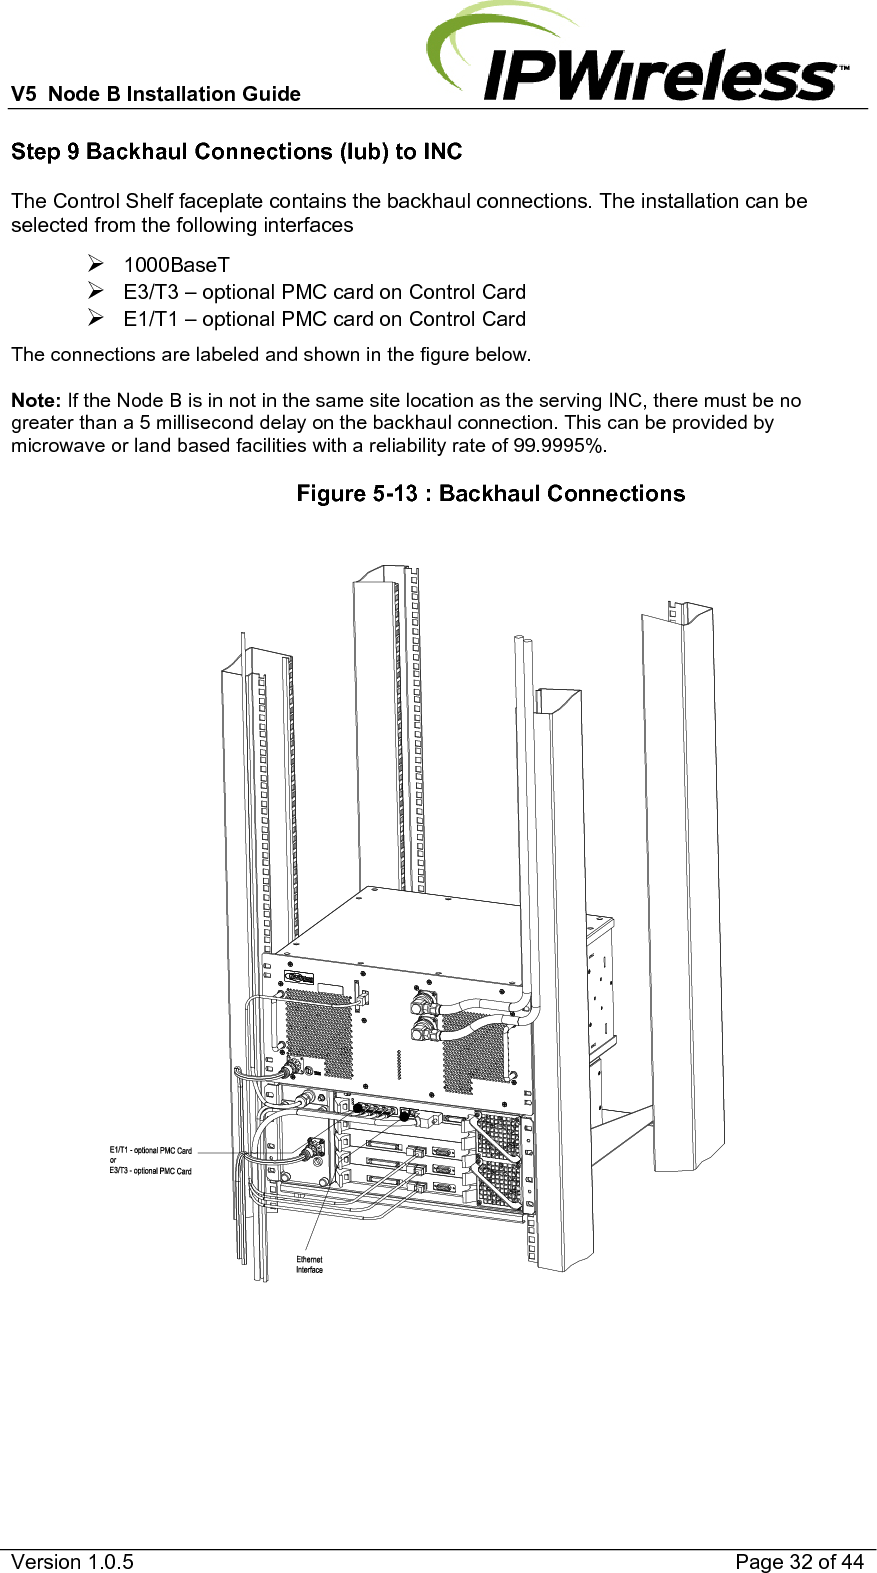 V5  Node B Installation Guide                           Version 1.0.5    Page 32 of 44 Step 9 Backhaul Connections (Iub) to INC The Control Shelf faceplate contains the backhaul connections. The installation can be selected from the following interfaces ¾ 1000BaseT  ¾ E3/T3 – optional PMC card on Control Card ¾ E1/T1 – optional PMC card on Control Card The connections are labeled and shown in the figure below.   Note: If the Node B is in not in the same site location as the serving INC, there must be no greater than a 5 millisecond delay on the backhaul connection. This can be provided by microwave or land based facilities with a reliability rate of 99.9995%.                   Figure 5-13 : Backhaul Connections     